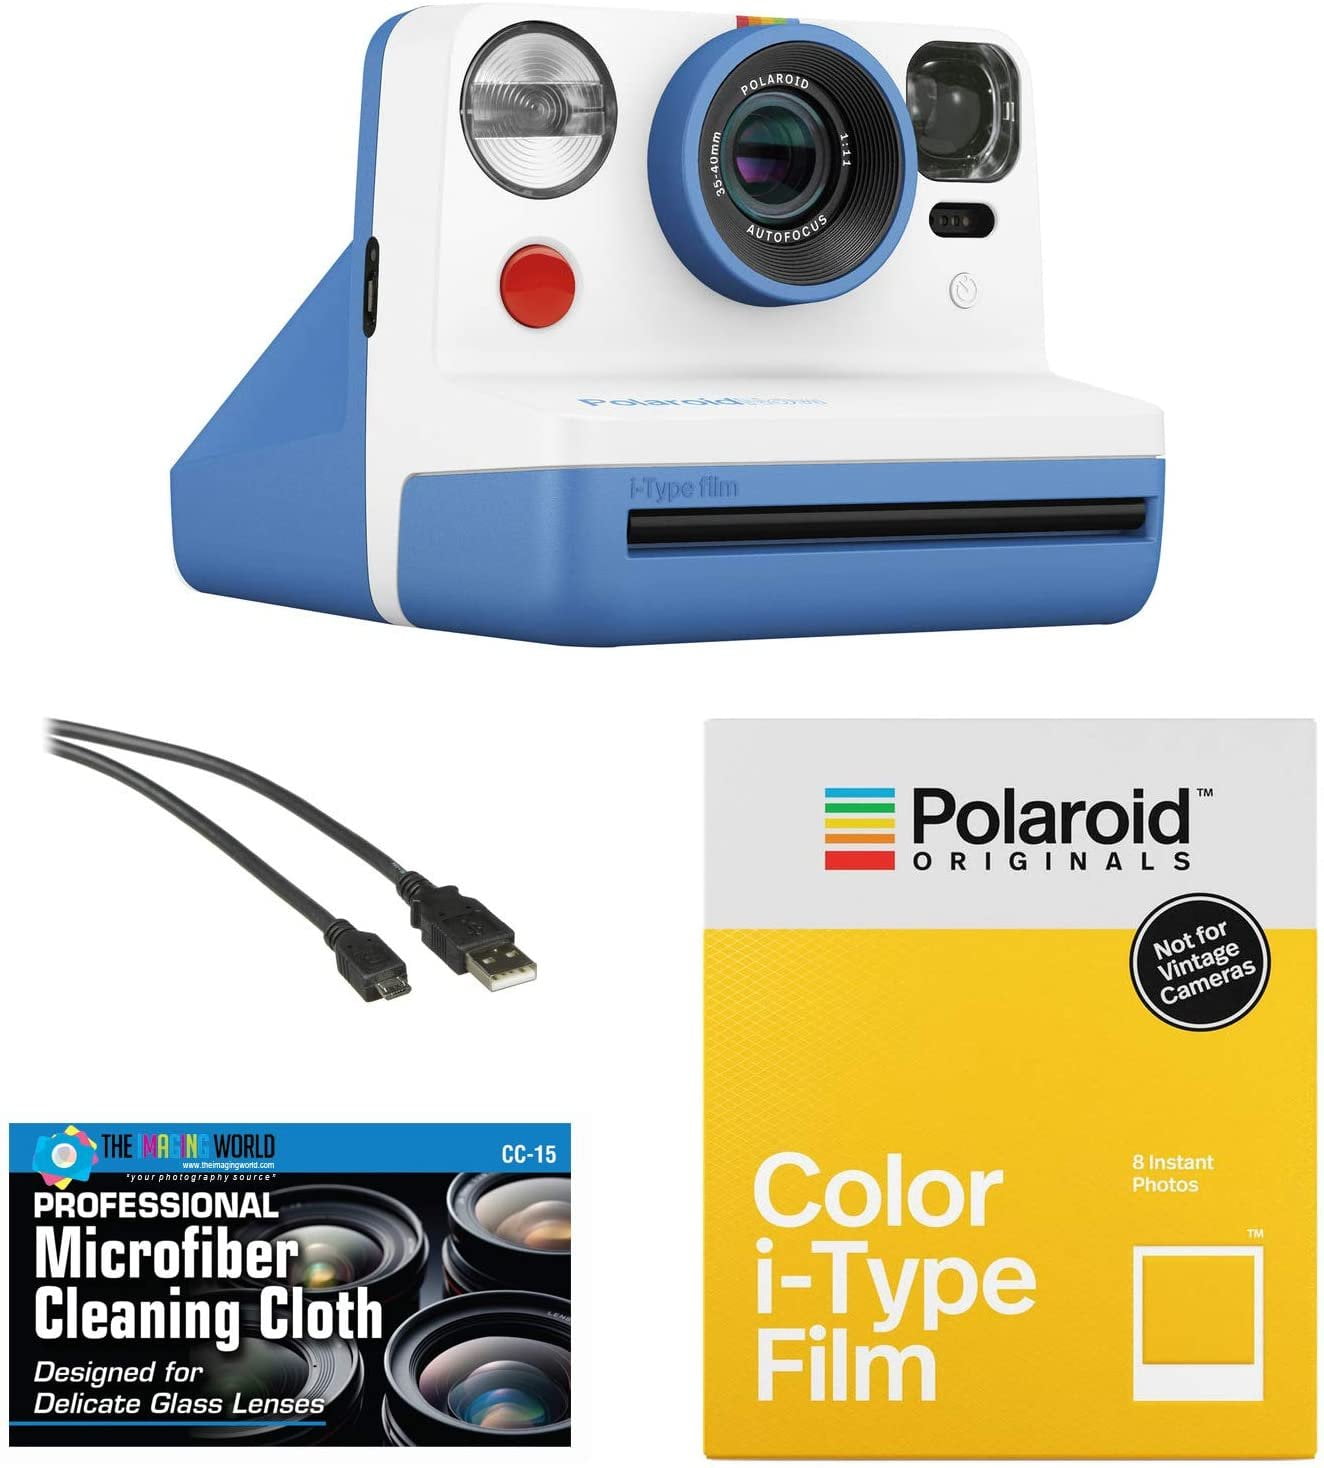 Polaroid Sport Action Camera 720p 12.1mp, Waterproof, Rechargeable Battery,  Mounting Accessories 